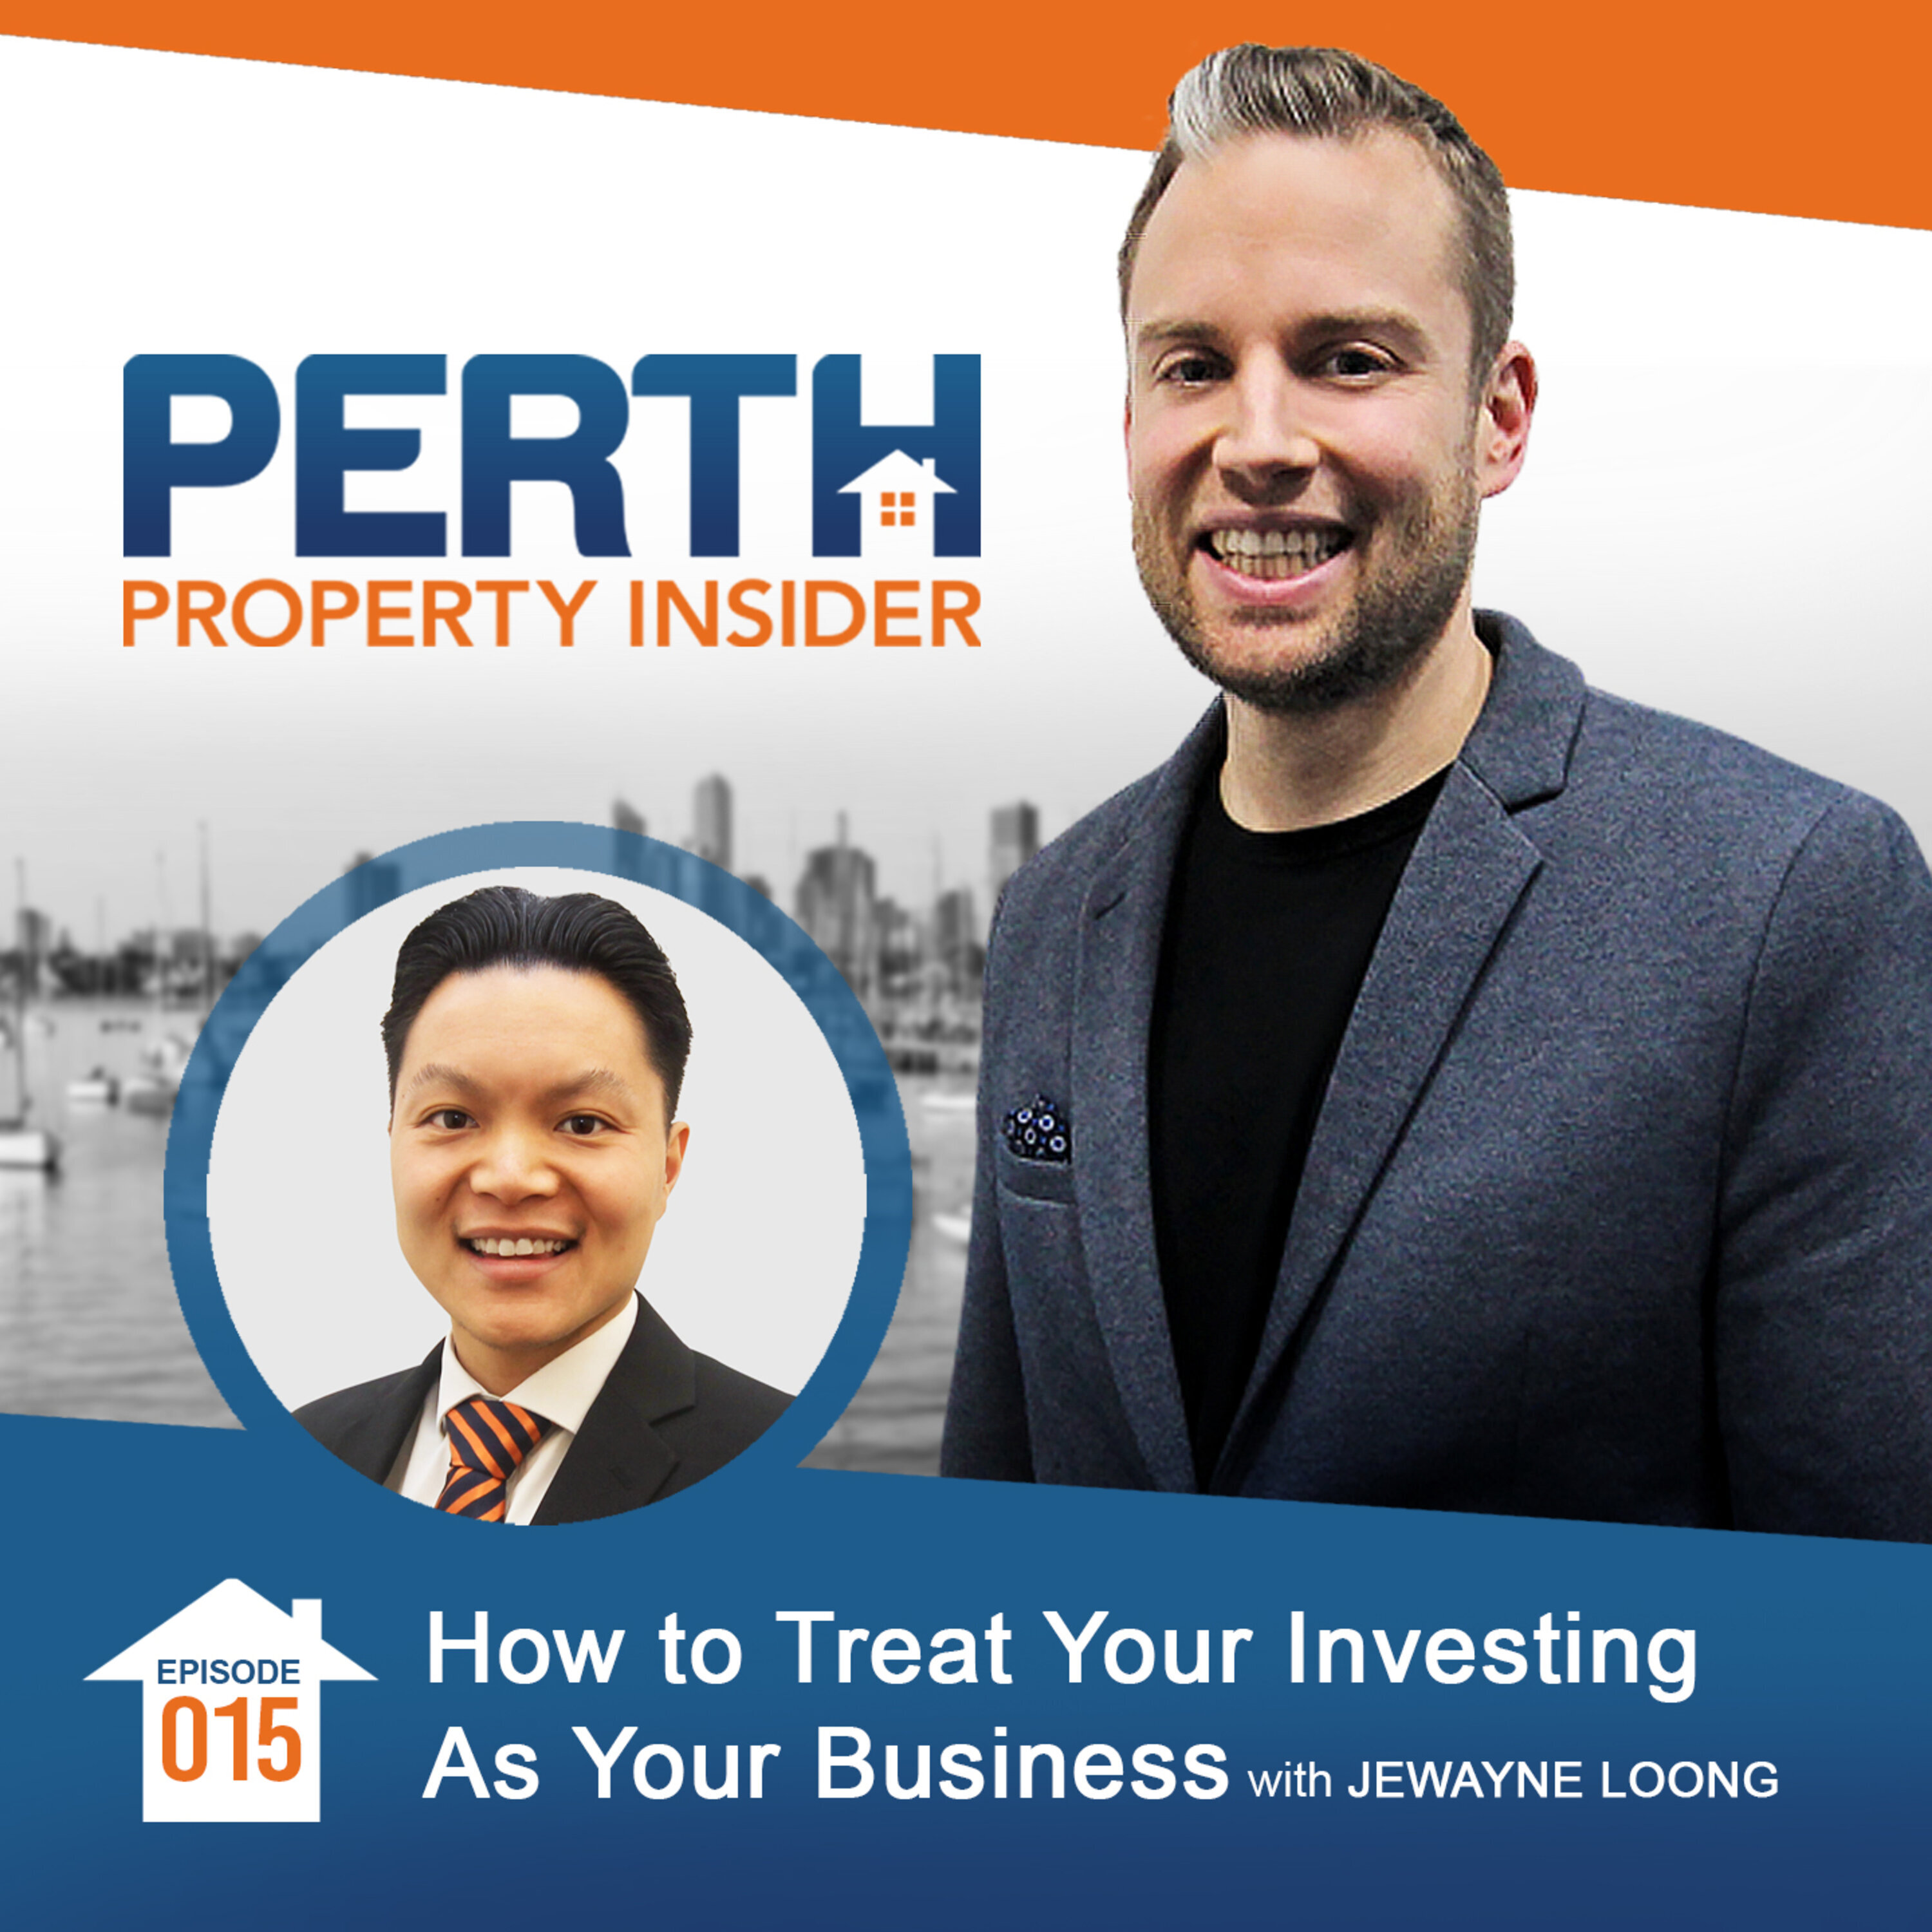 How to Treat Your Investing As Your Business with Jewayne Loong